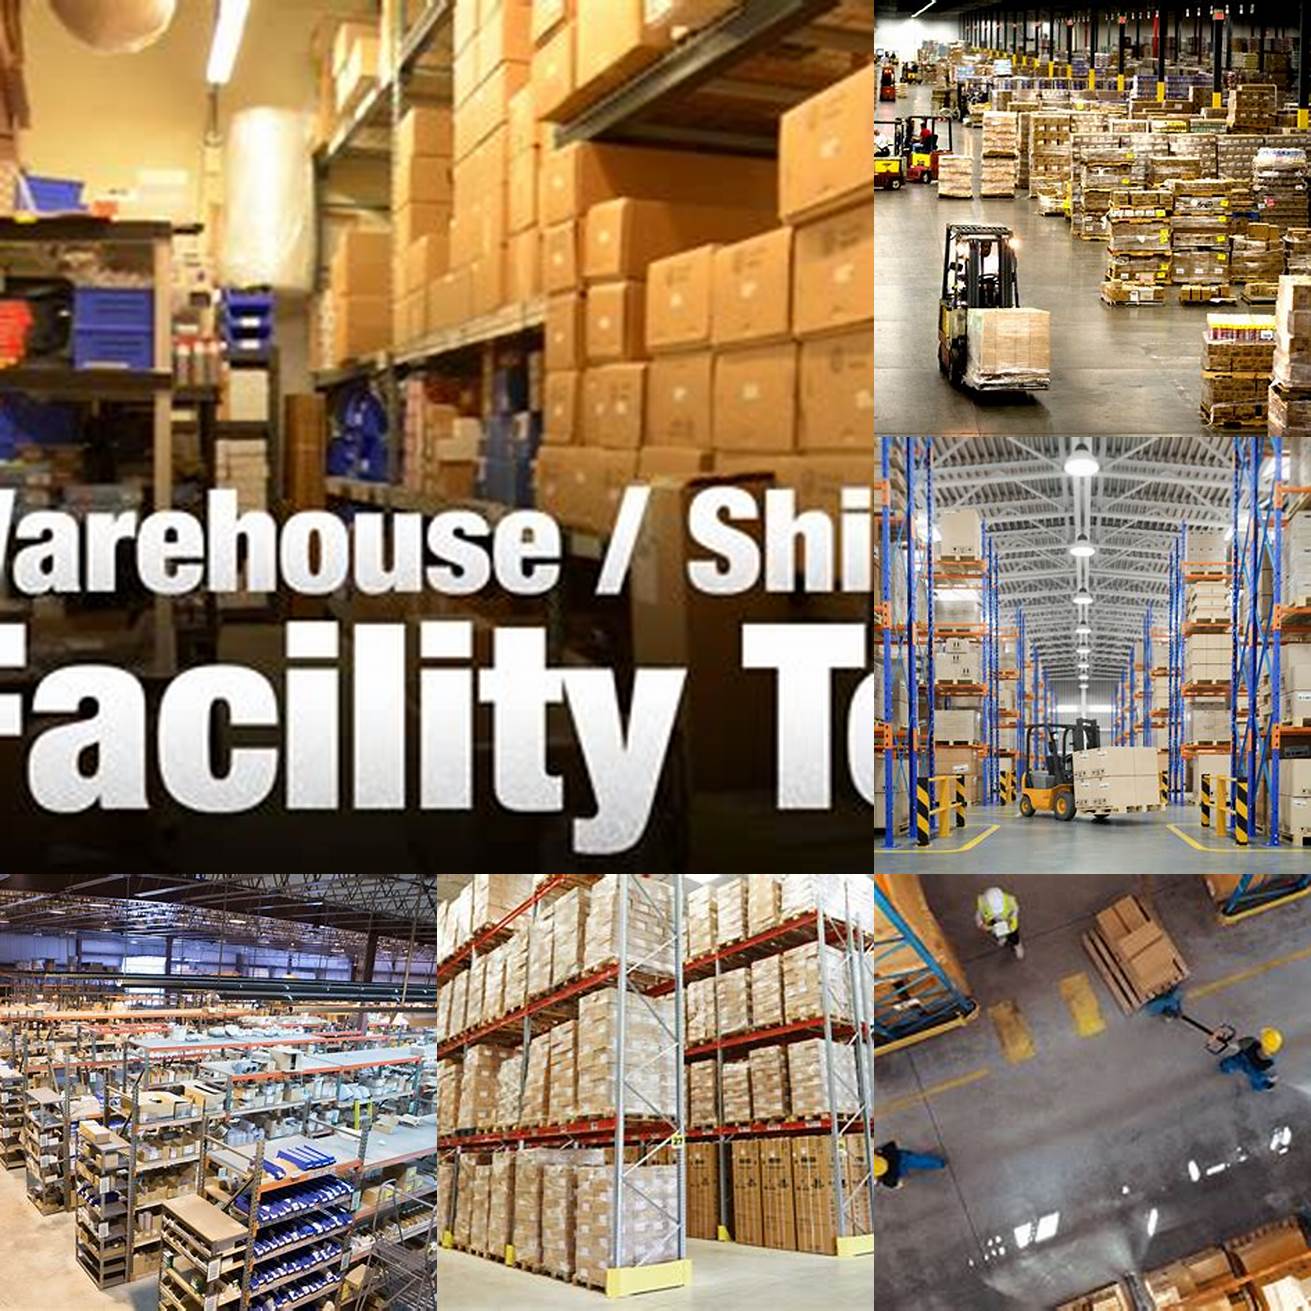 3 Behind-the-scenes footage of a wholesale distributors warehouse and shipping facilities